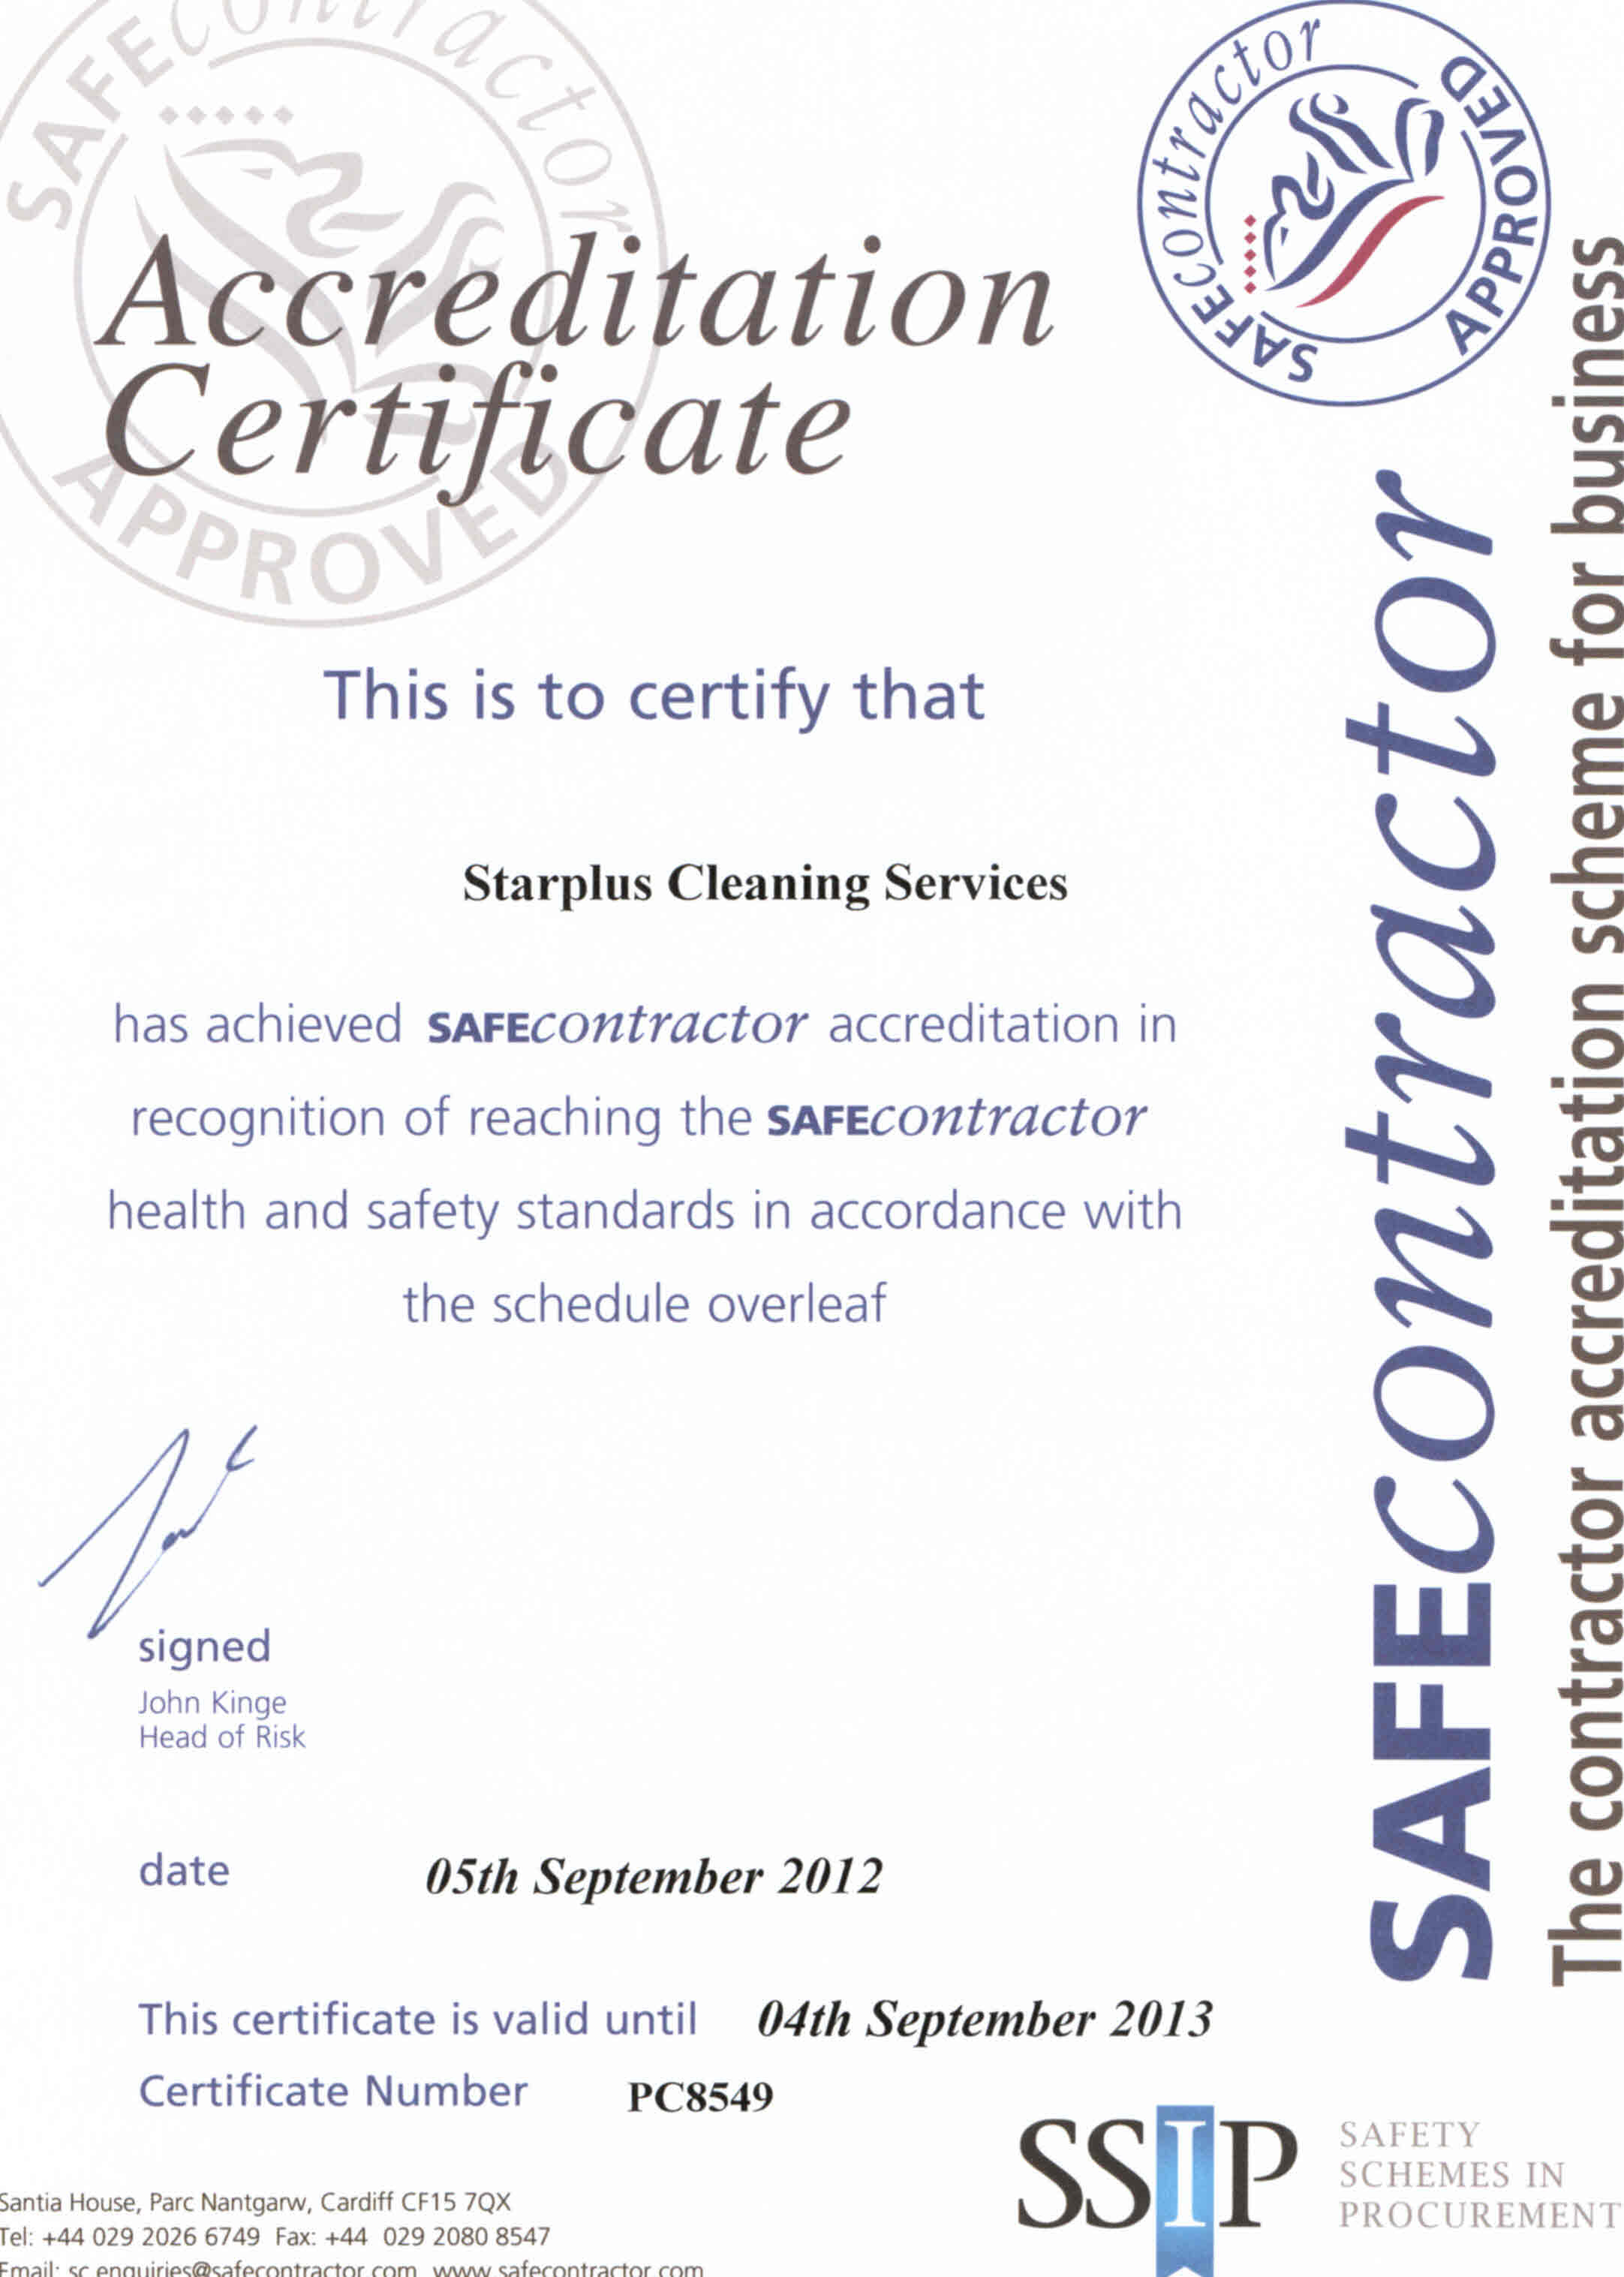 We are please to announce that we have received our renewal accreditation with Safe Contractor for another year!